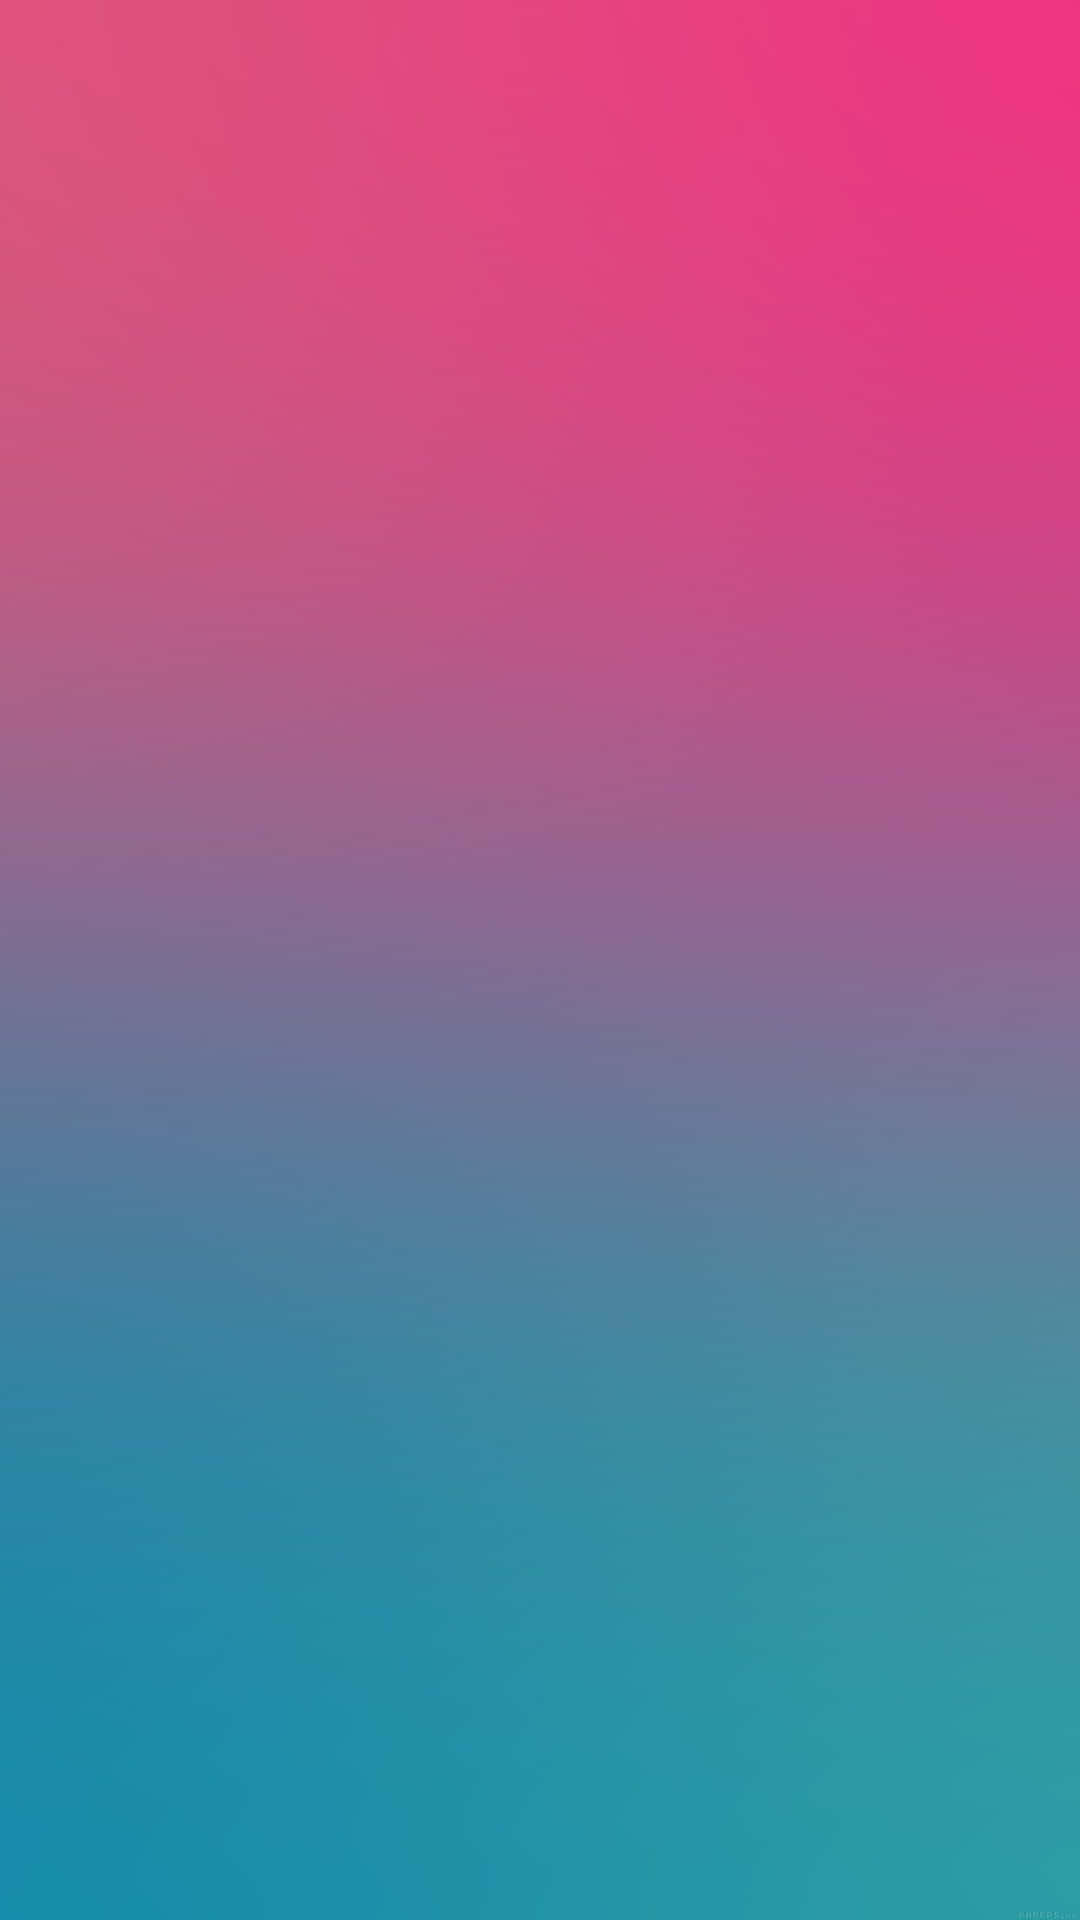 Check out this gradient iPhone wallpaper Wallpaper